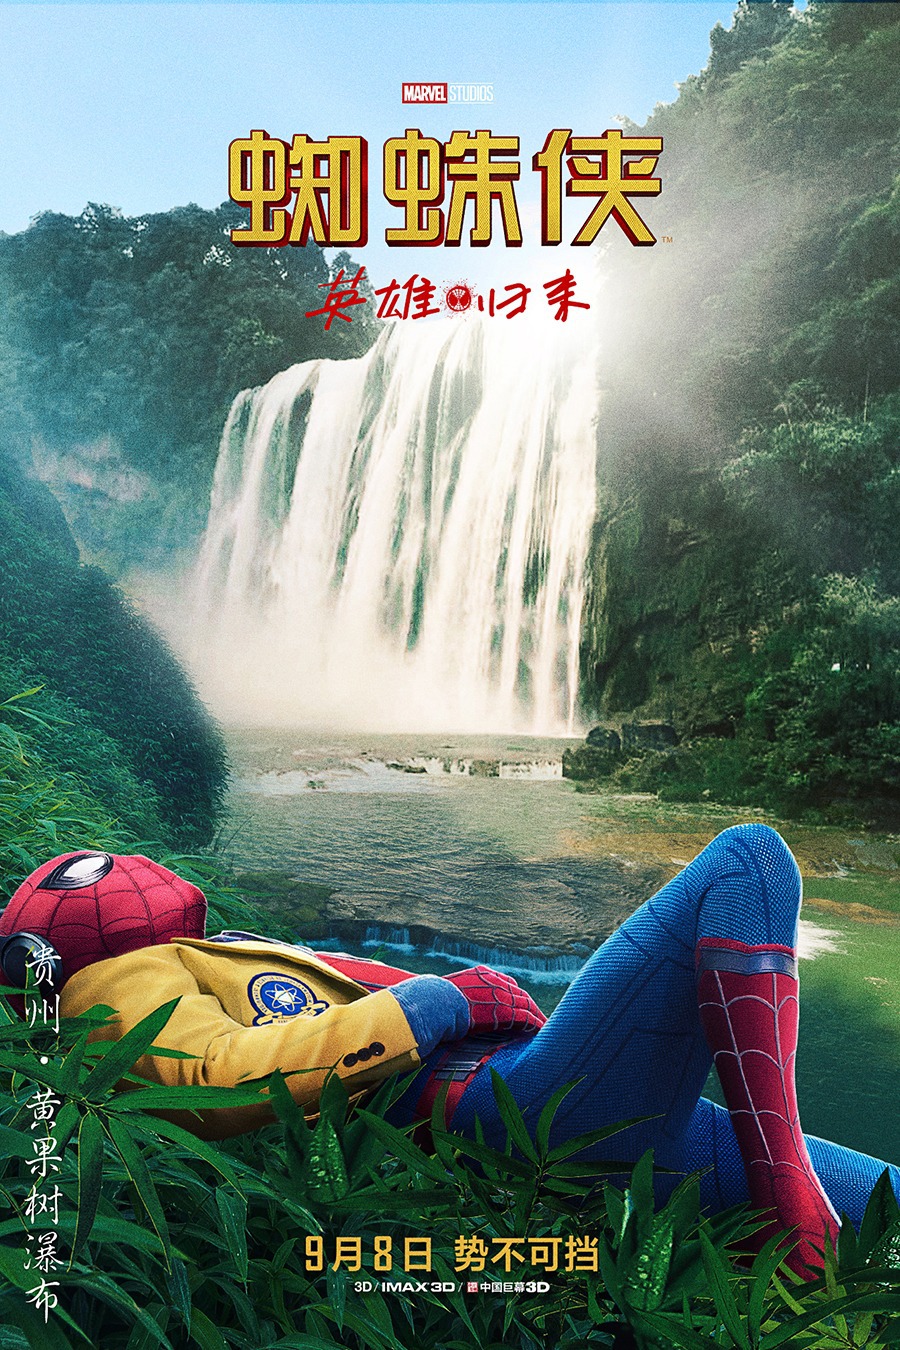 Extra Large Movie Poster Image for Spider-Man: Homecoming (#21 of 56)